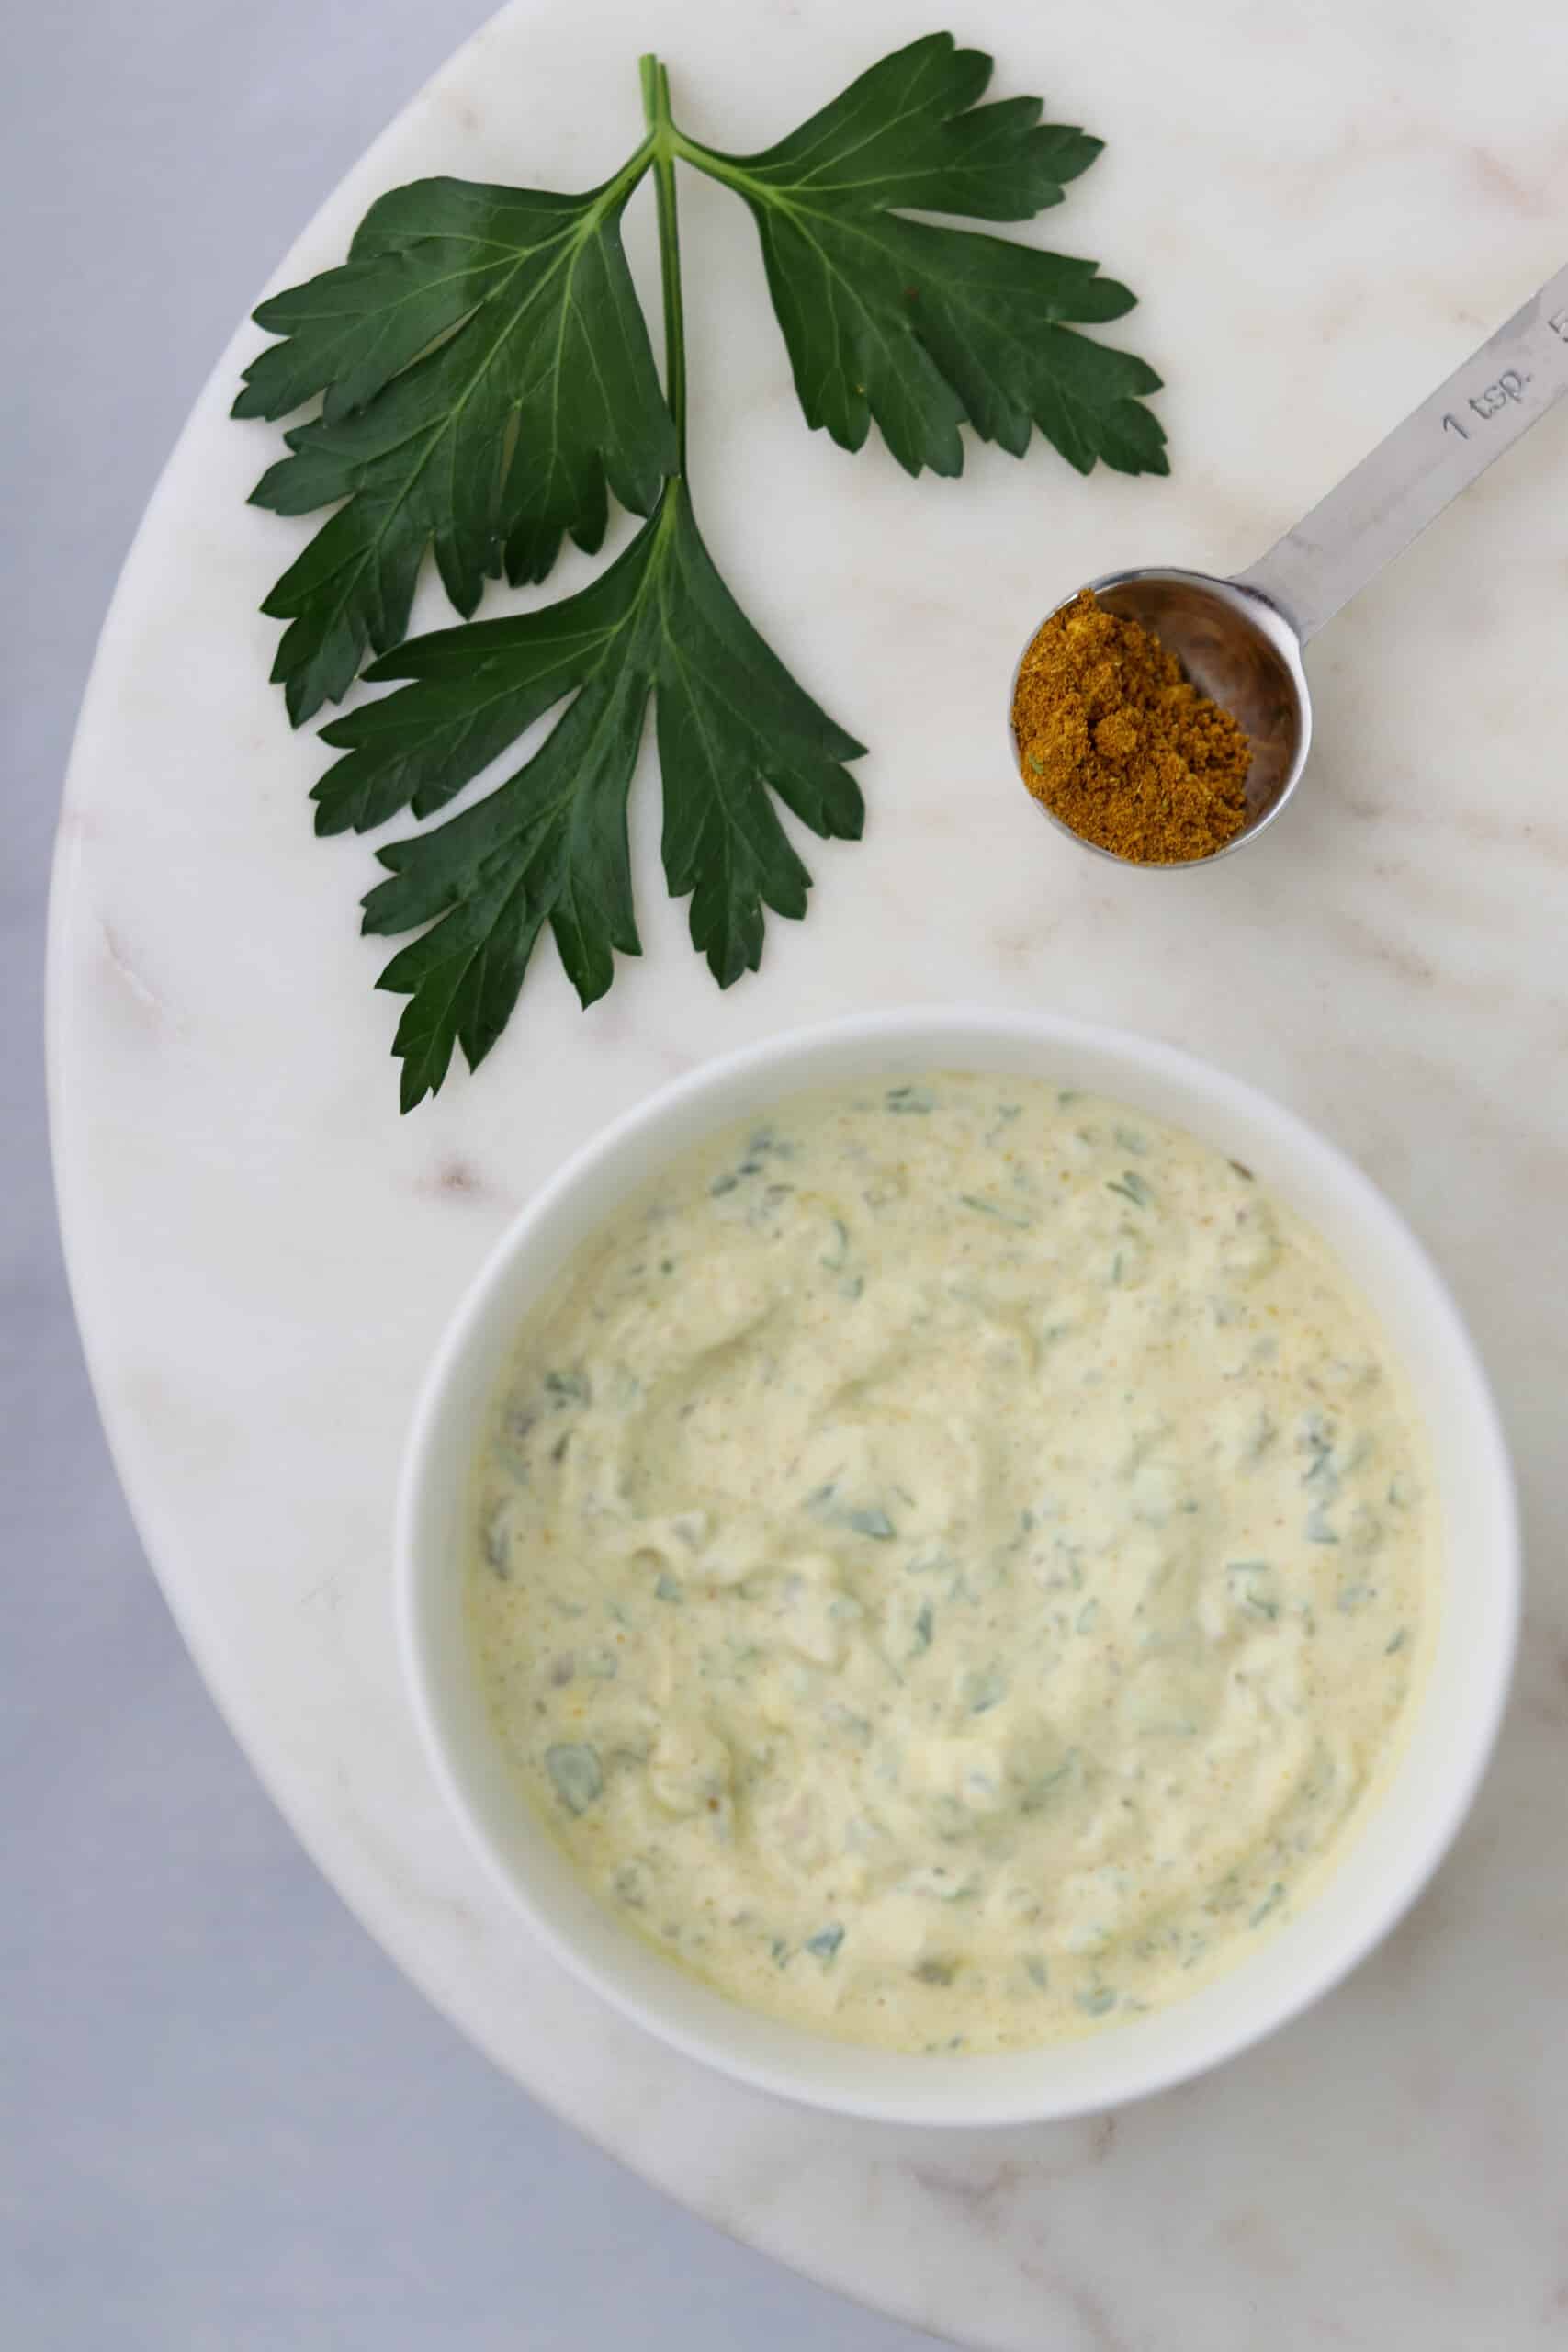 A bowl of Danish Remoulade sauce next to a sprig of parsley and curry powder.